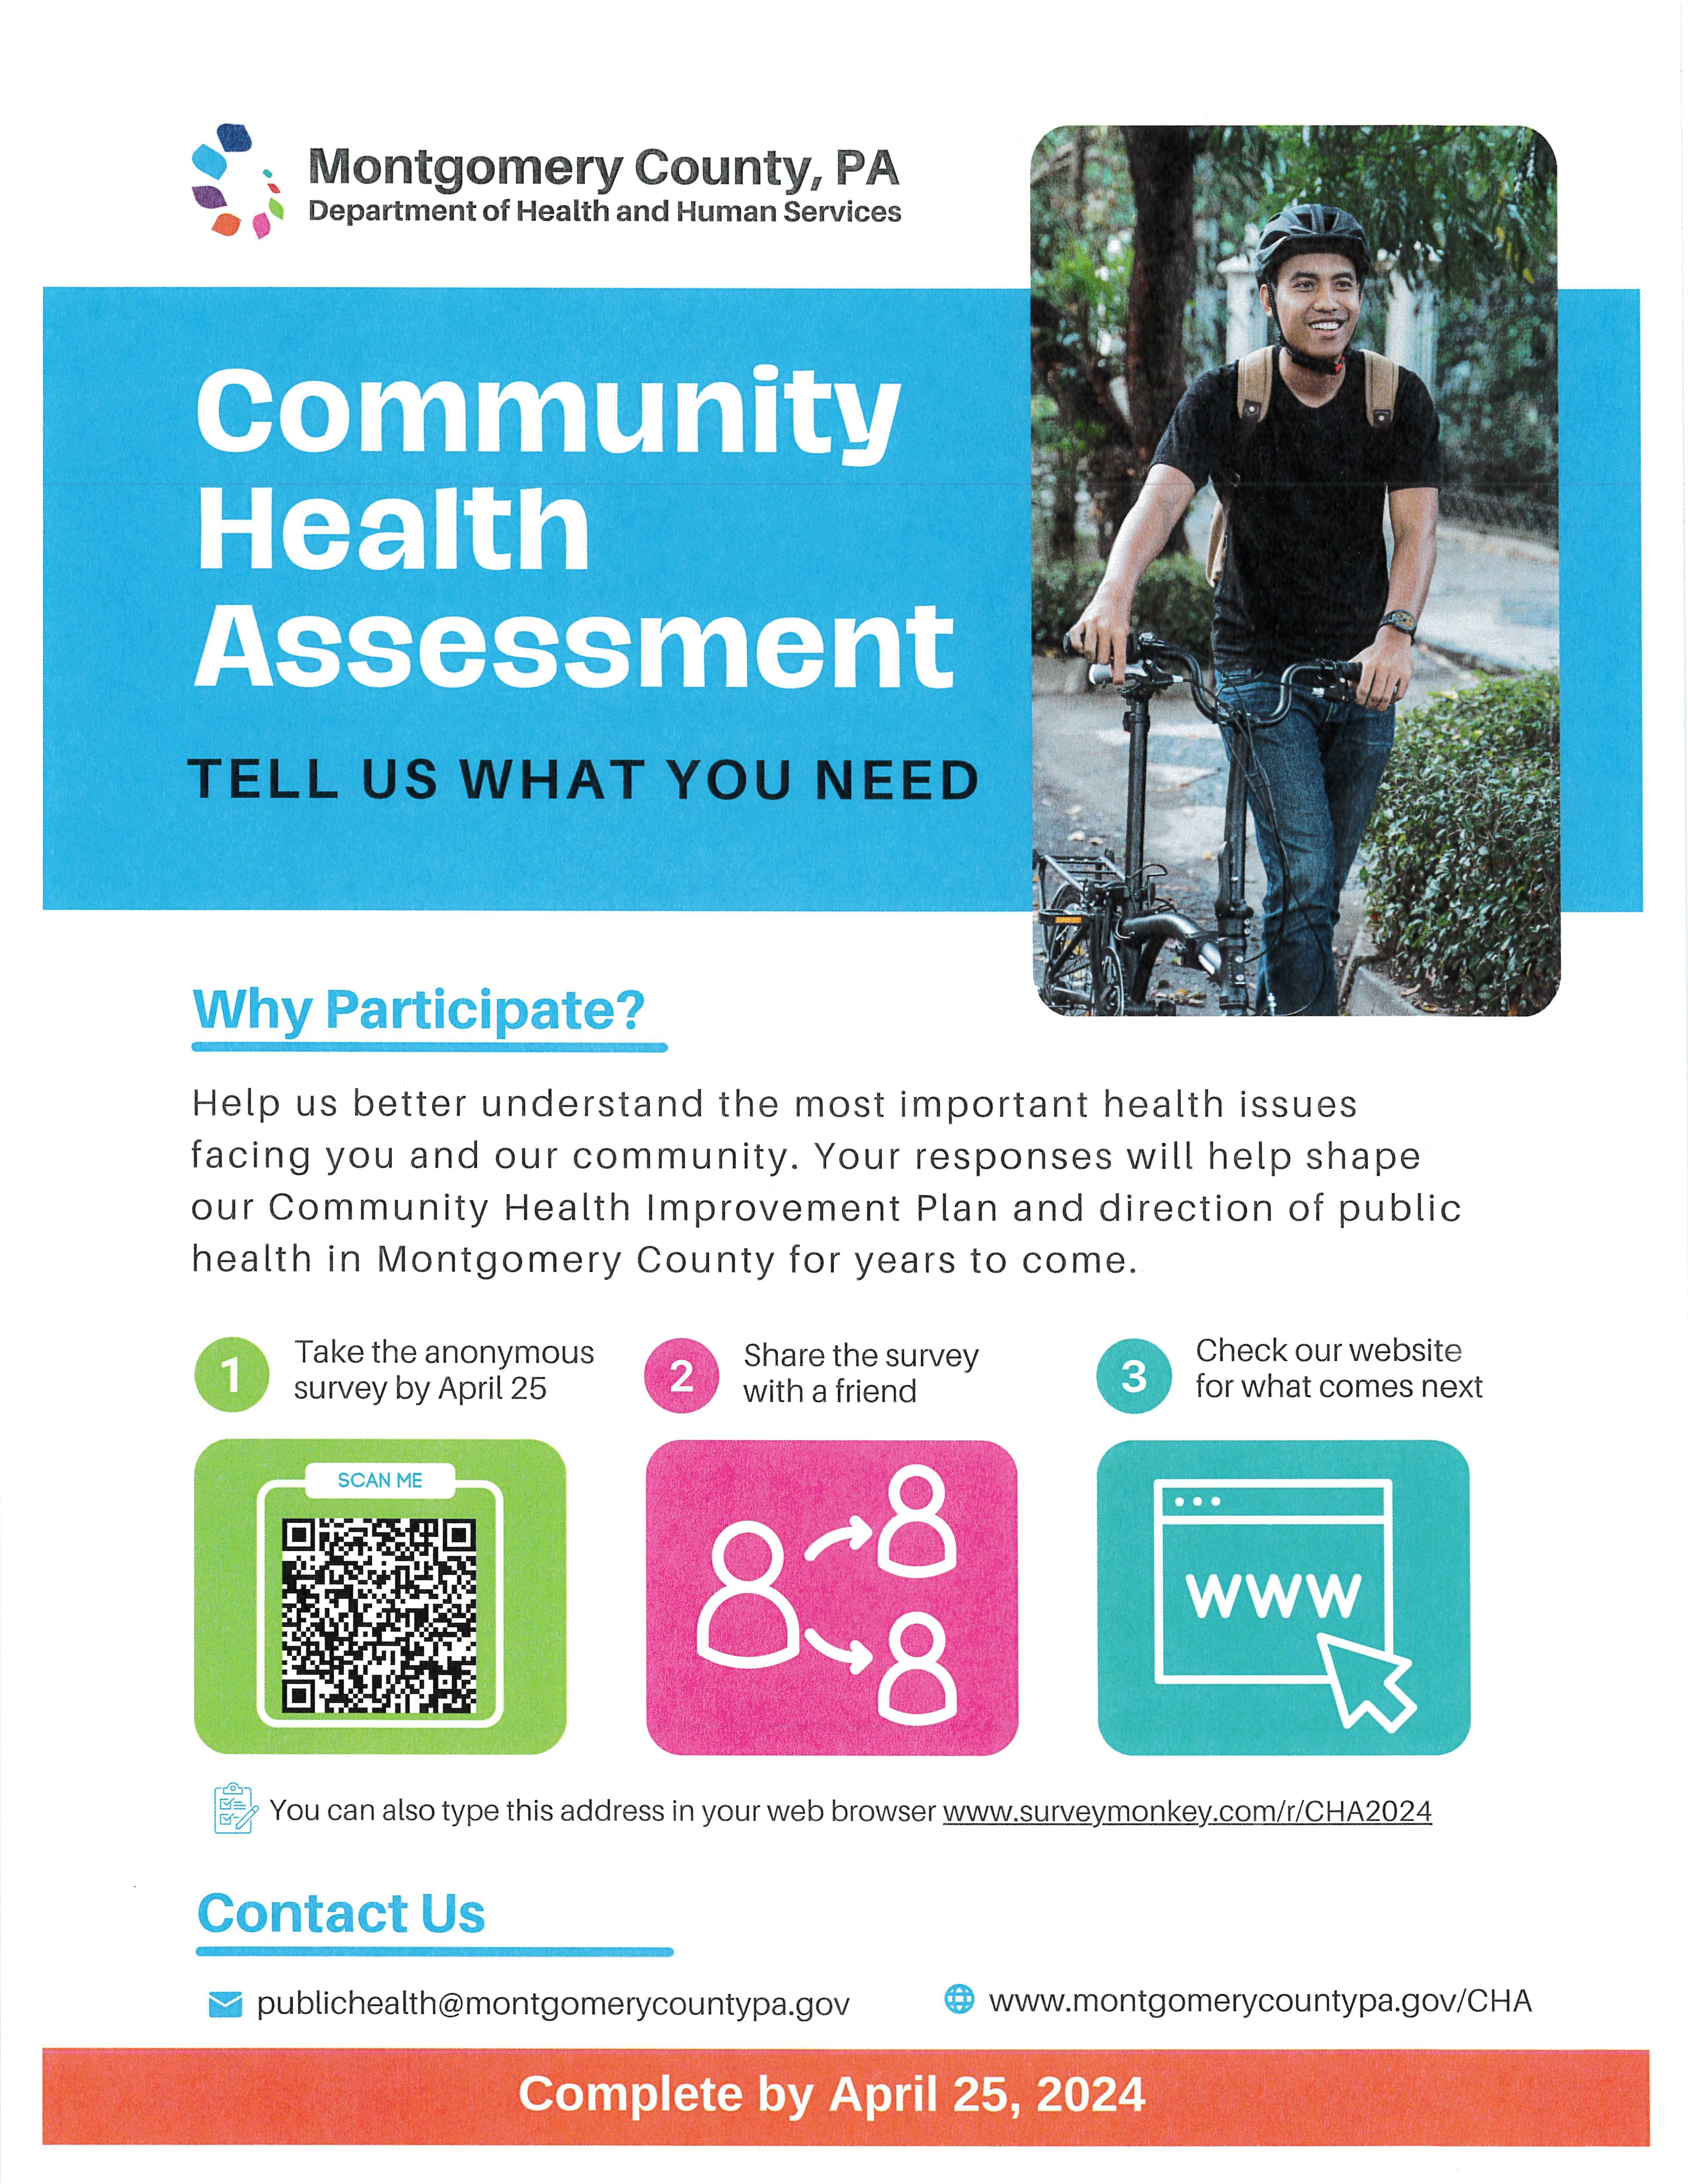 Help Montgomery County, PA better understand our community's health needs!